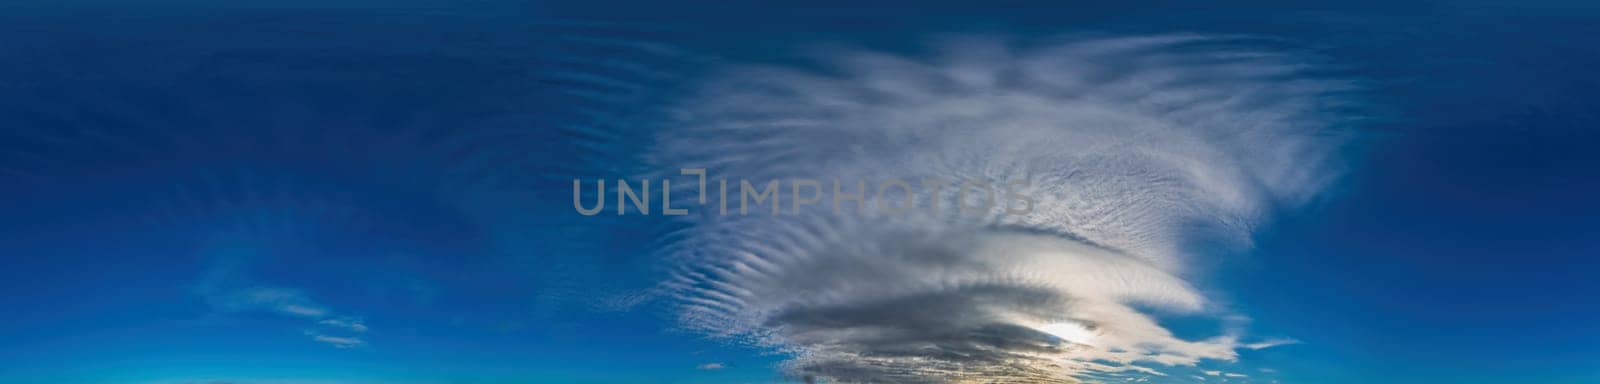 Blue sky with Cirrus clouds Seamless panorama in spherical equirectangular format. Complete zenith for use in 3D graphics, game and for composites in aerial drone 360 degree panoramas as a sky dome.